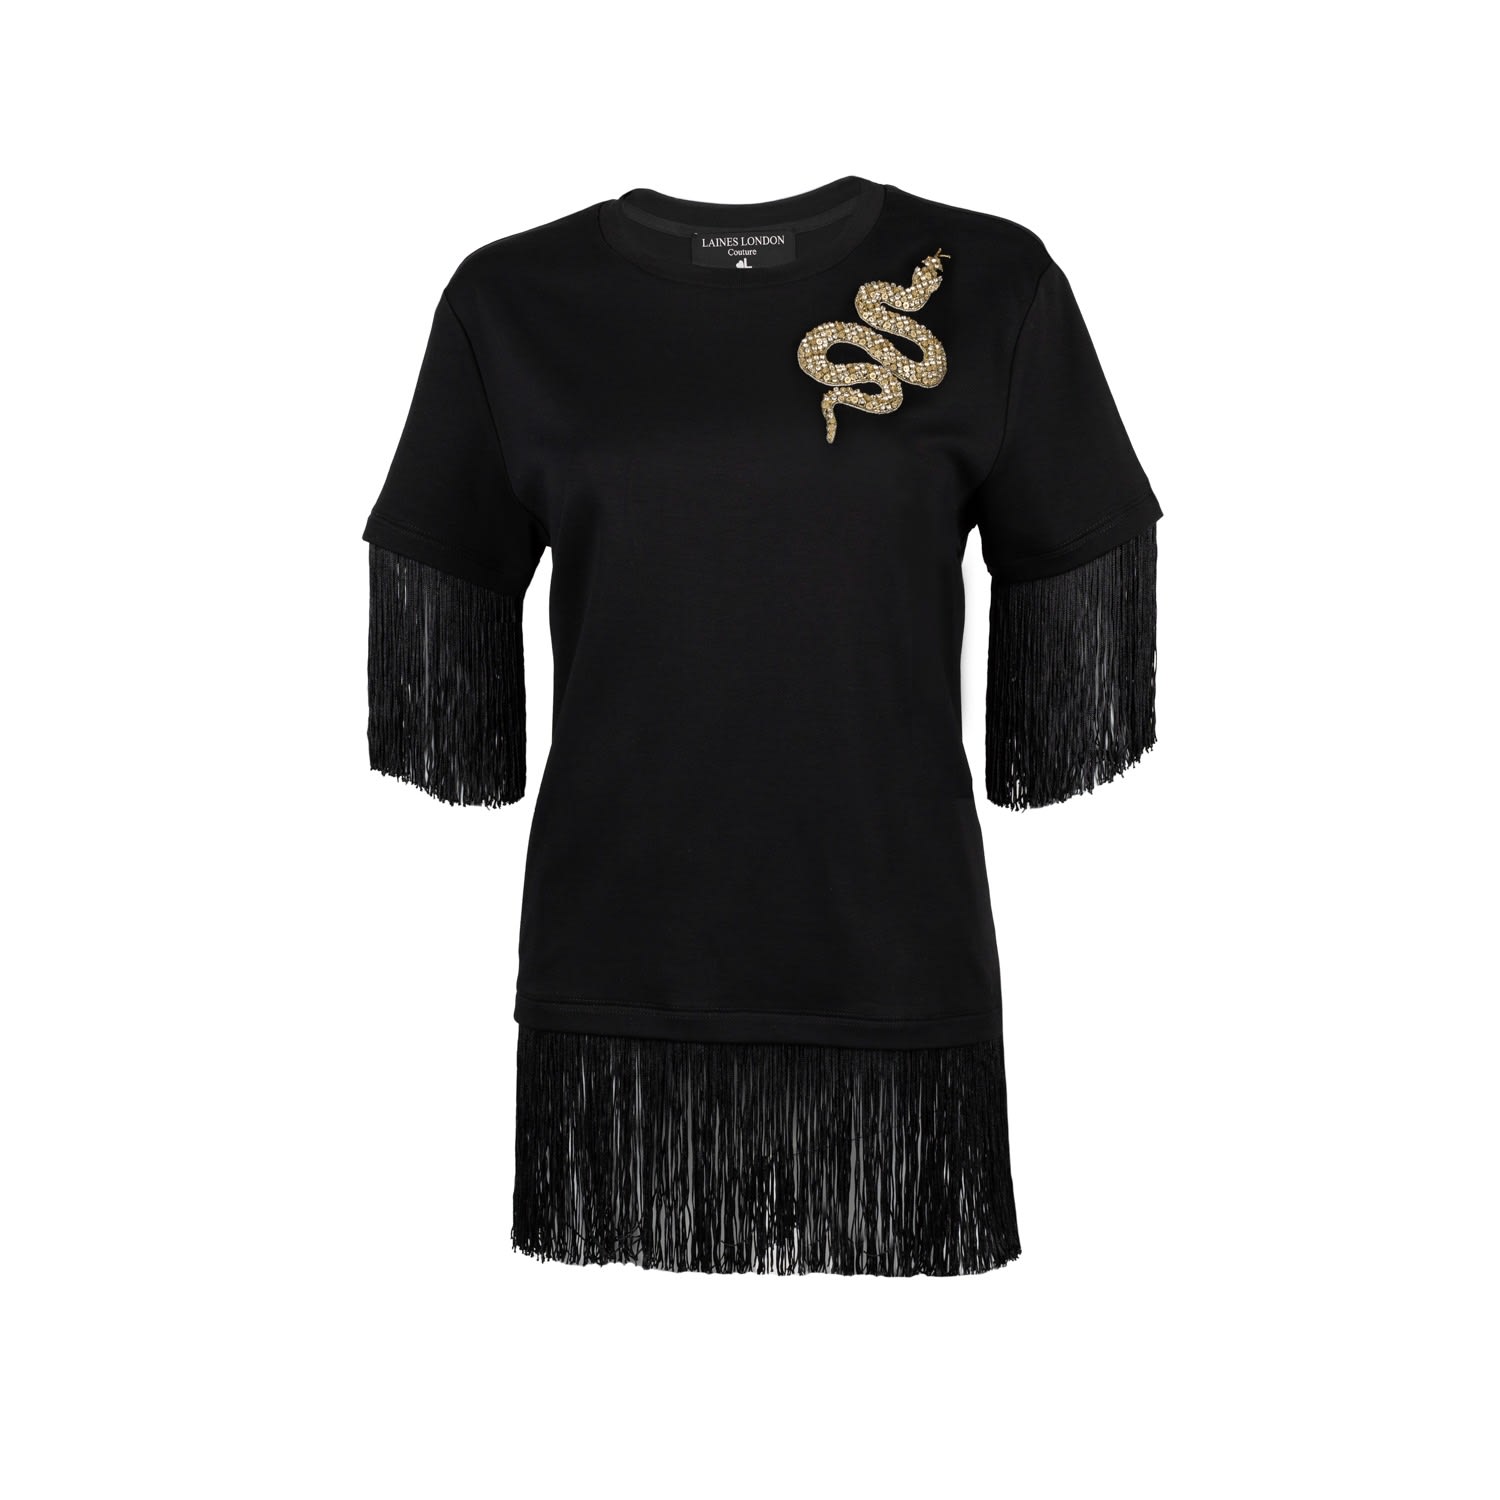 Women’s Laines Couture Fringed Tassel T-Shirt With Embellished Snake - Black S/M Laines London